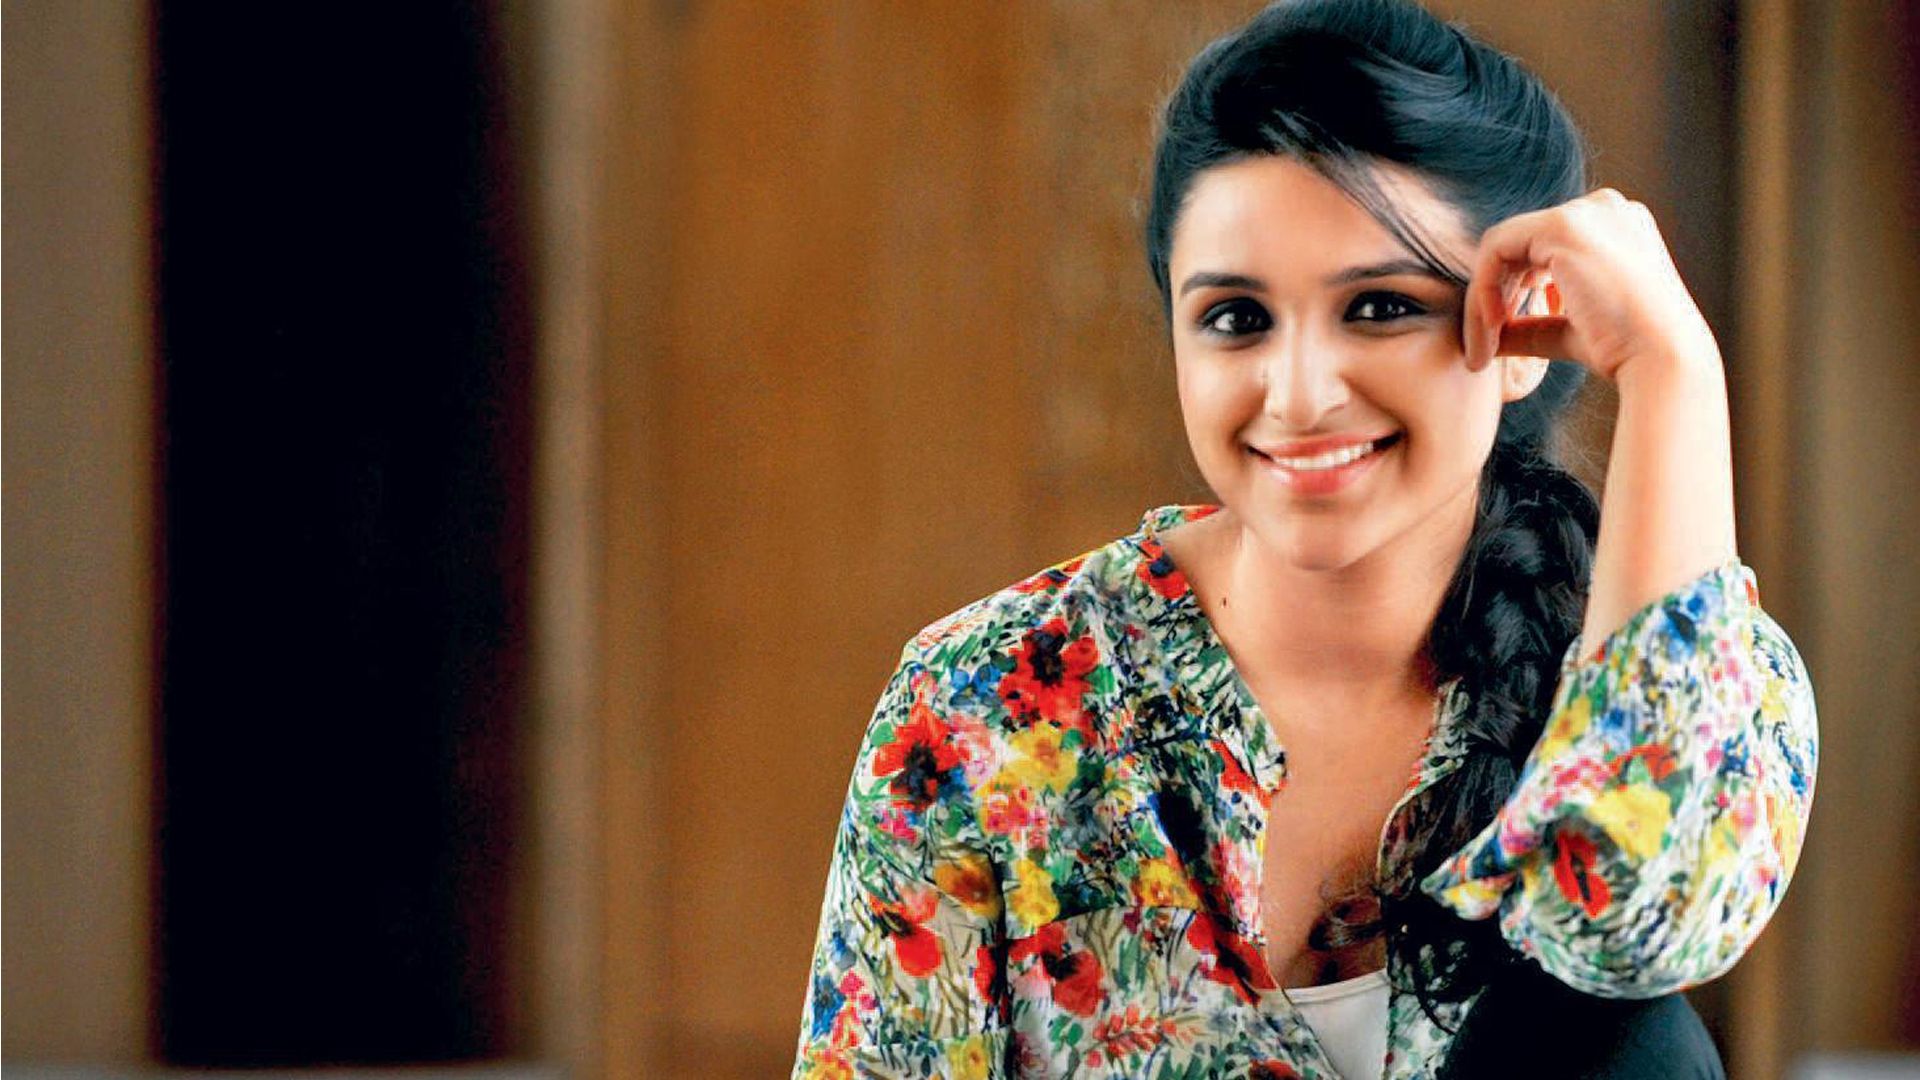 Lovely Parineeti Chopra Smile Look Free Mobile Desktop Background Hd Pictures